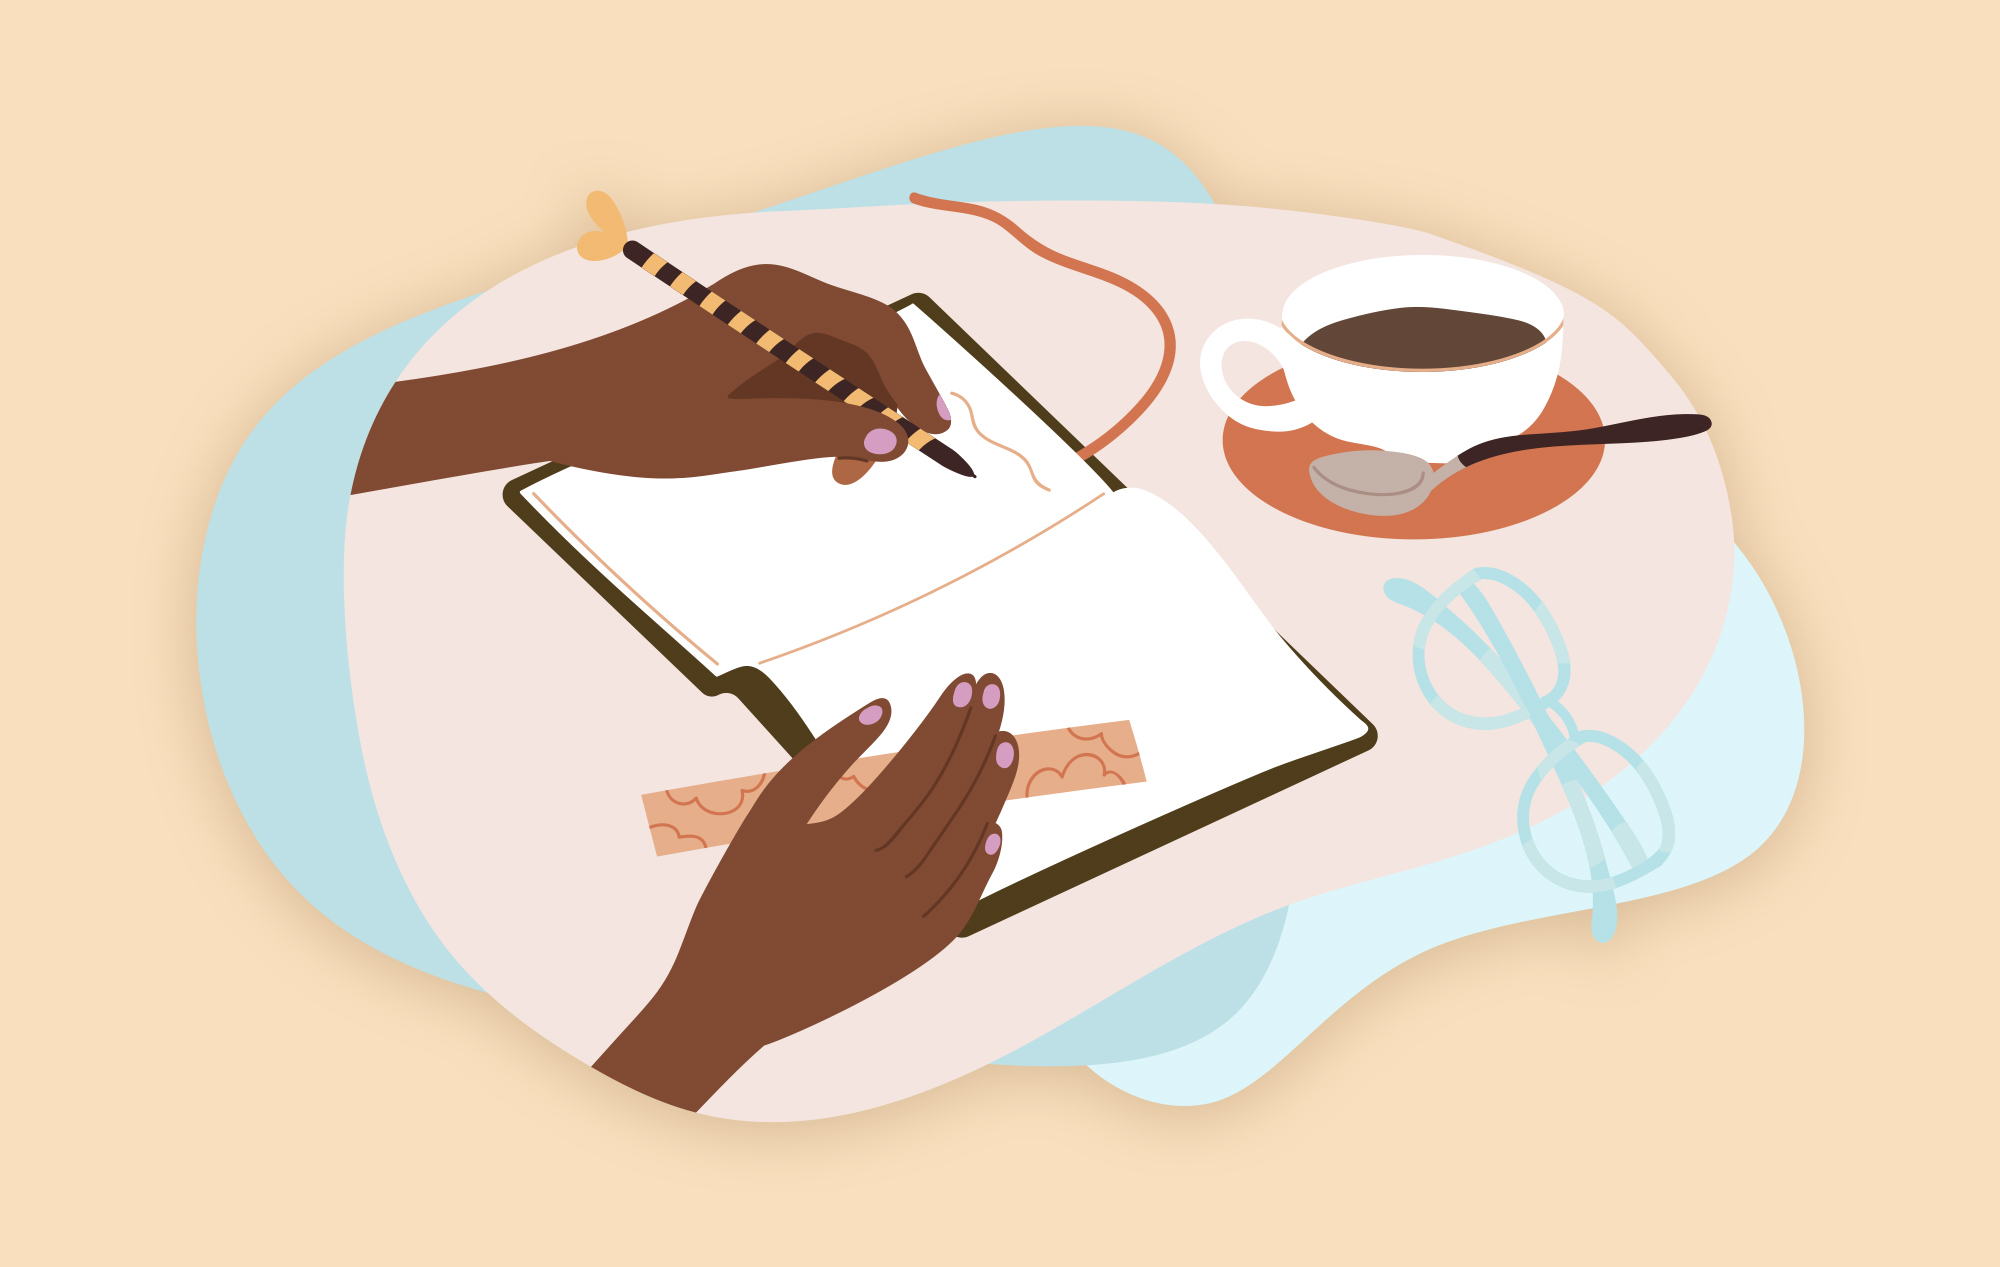 Illustration of someone writing in their notebook. A coffee cup and glasses lay next to the notebook.